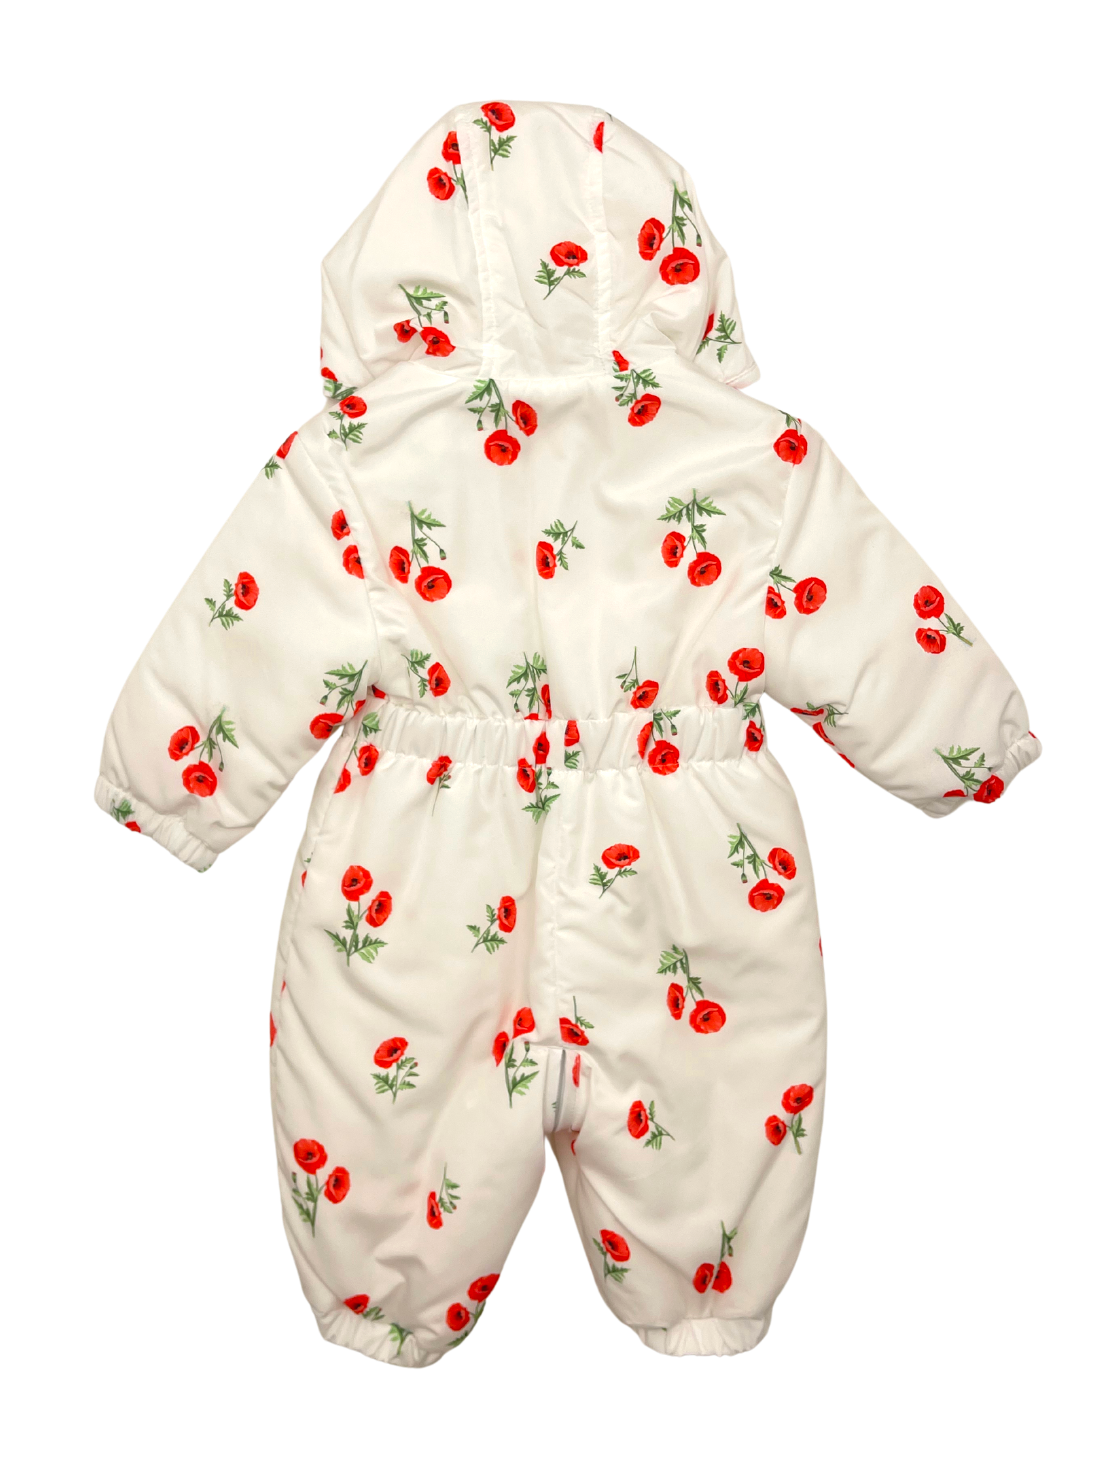 ALETTA - White floral jumpsuit - 1 month old